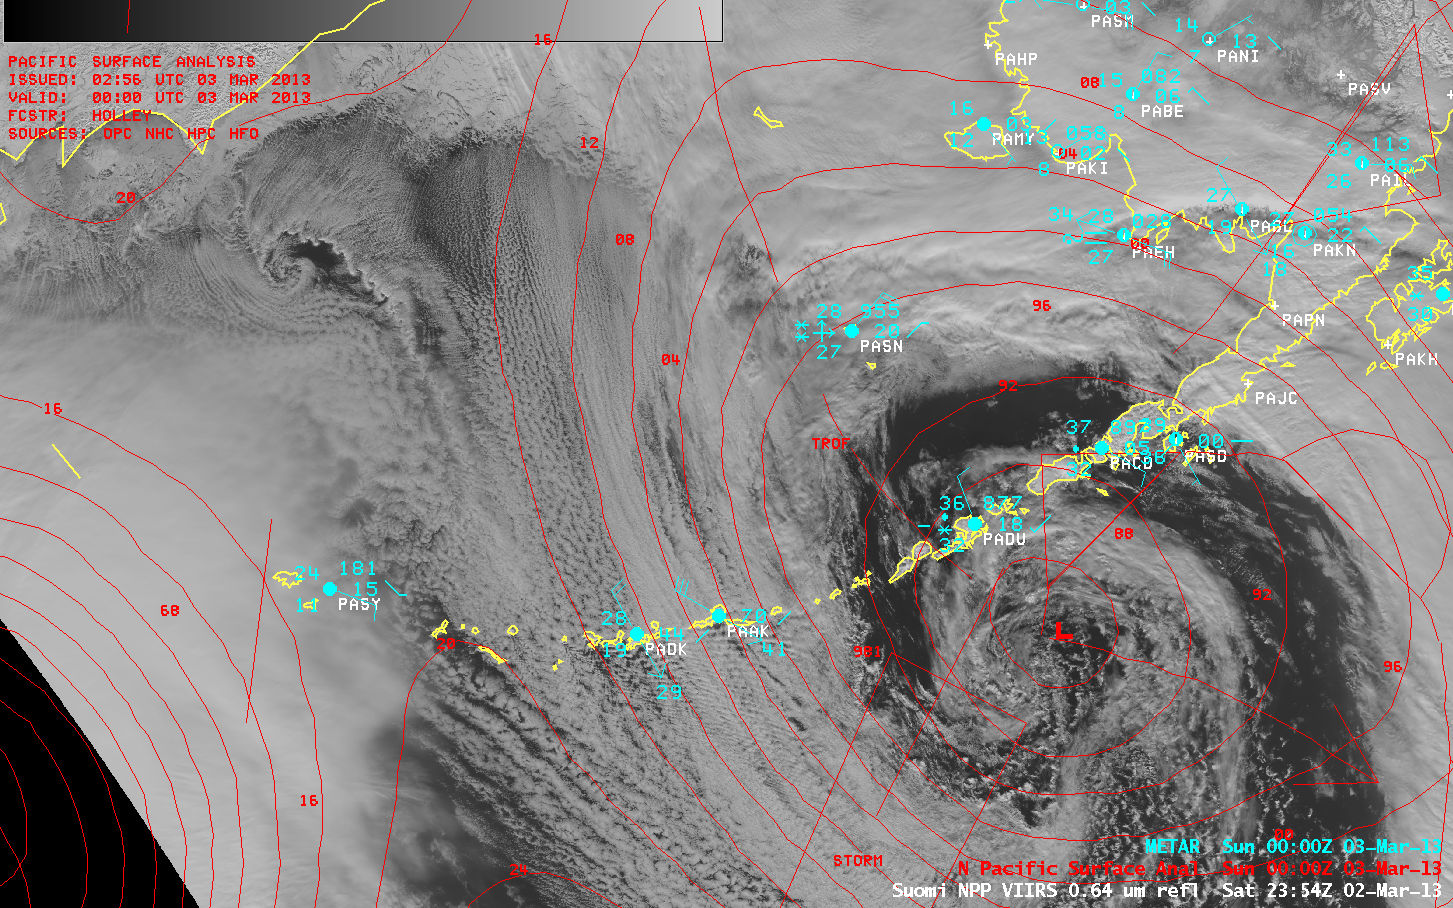 Suomi NPP VIIRS 0.64 Âµm visible channel image + Surface reports and surface analysis